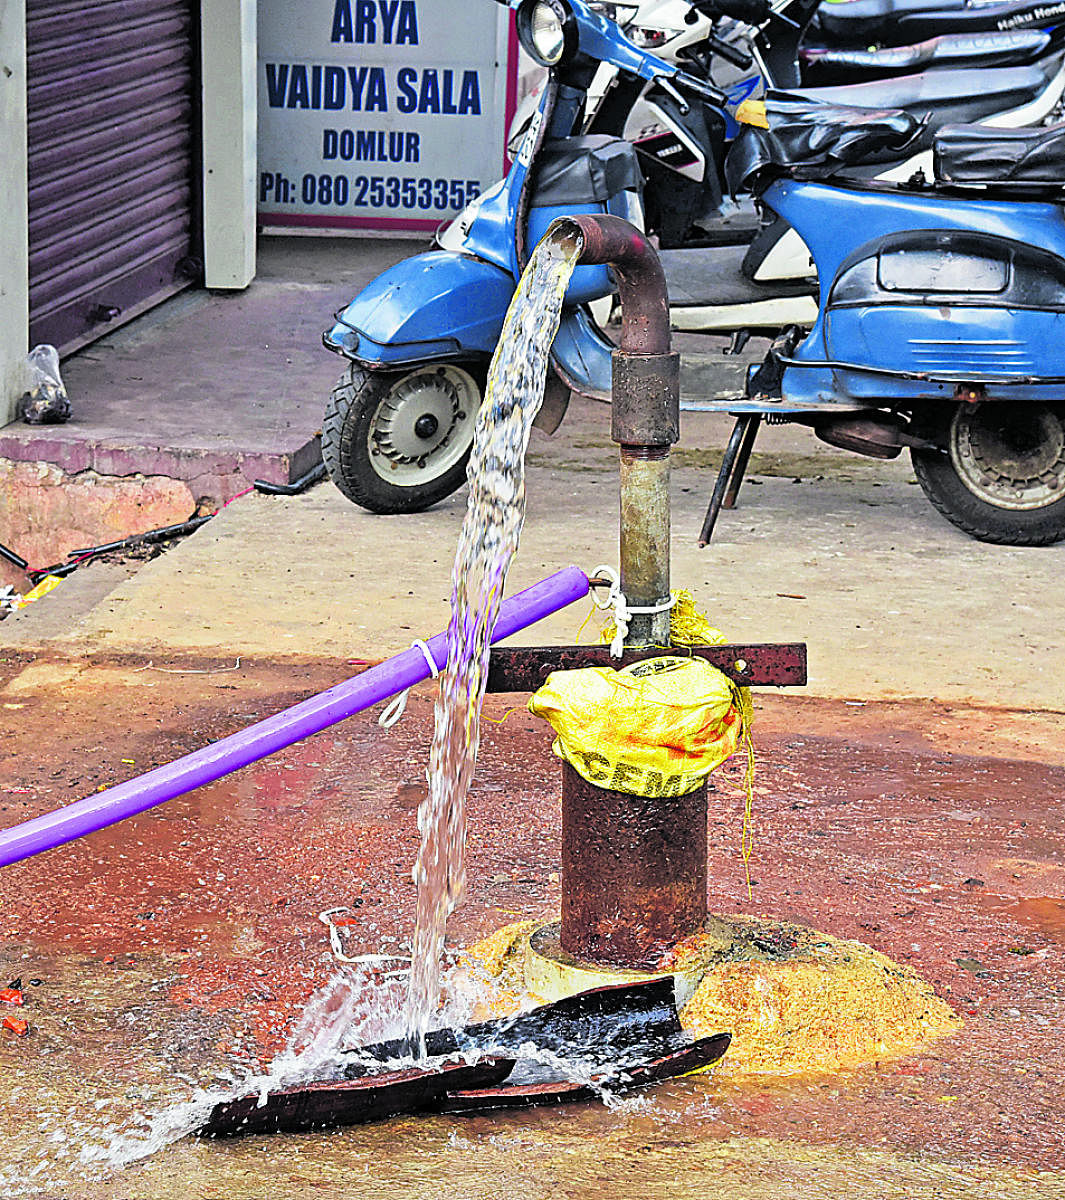 All industries and commercial entities utilising borewell water must register on the online portal by April 30.